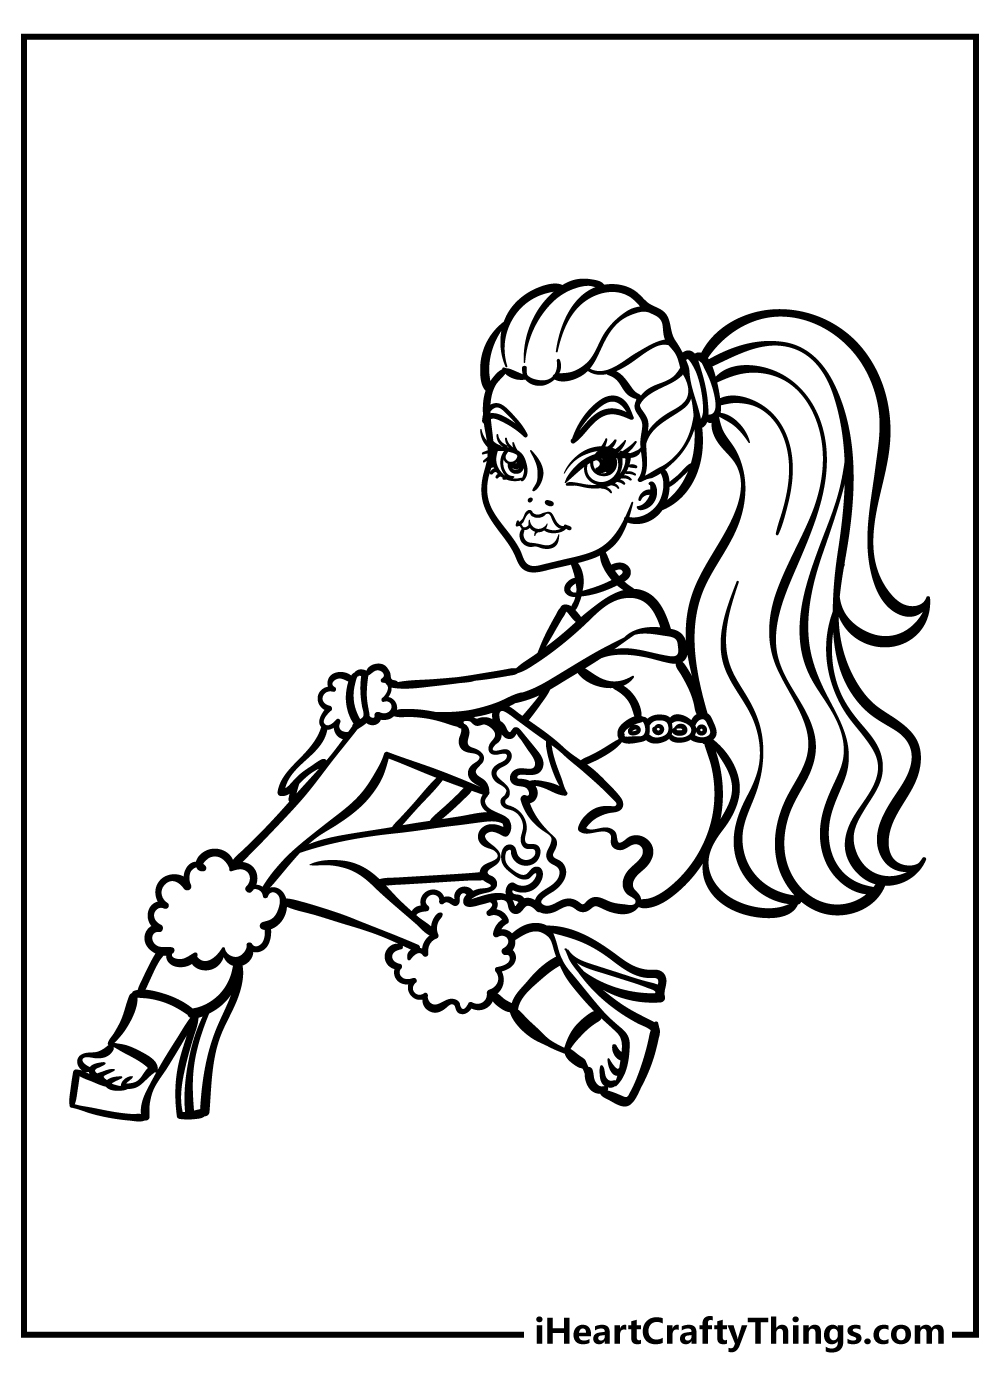 Monster High Coloring Pages for adults free printable